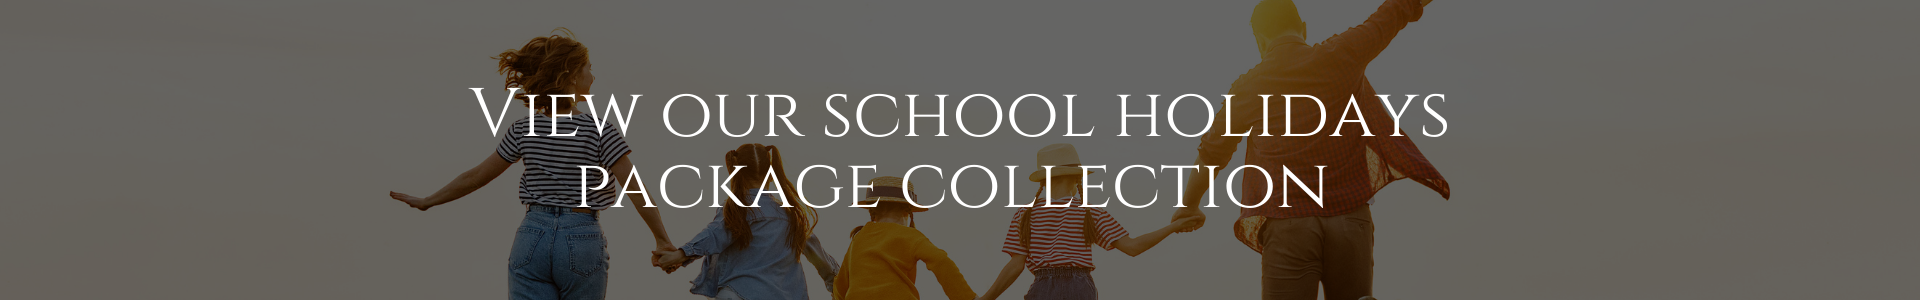 View our school holidays package collection by clicking here